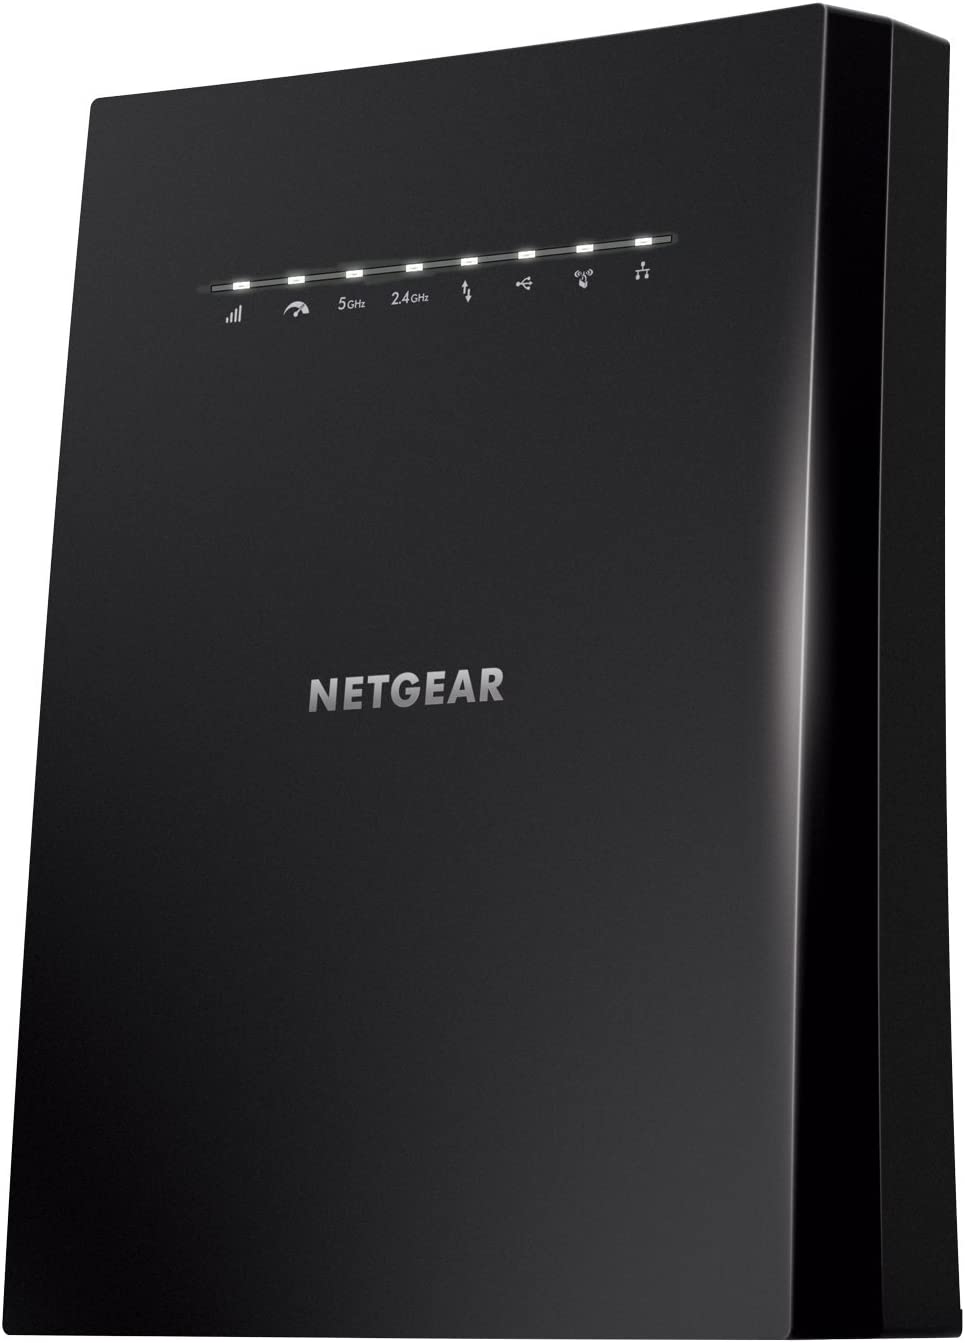 NETGEAR WiFi Mesh Range Extender EX8000 - Coverage up to 2500 sq.ft. and 50 Devices with AC3000 Tri-Band Wireless Signal Booster & Repeater